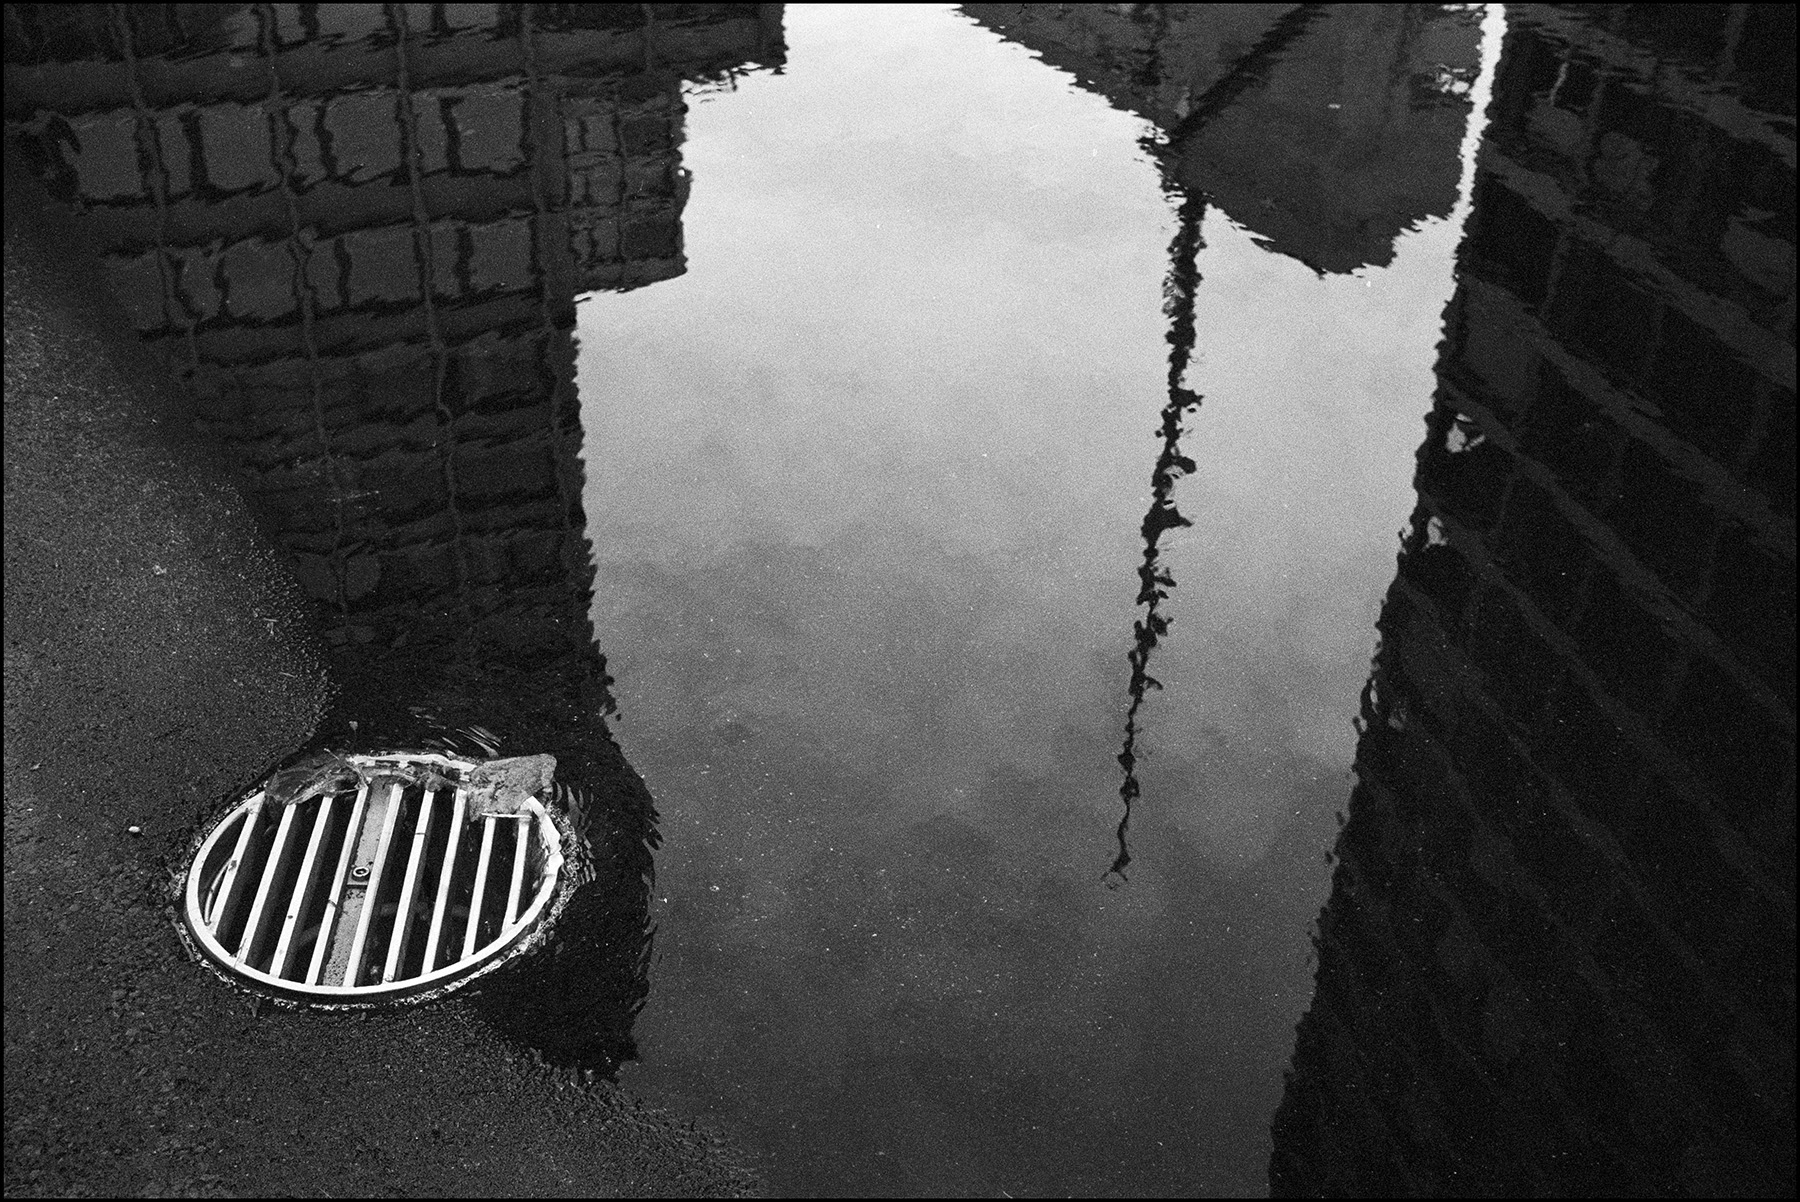 reflections in a puddle